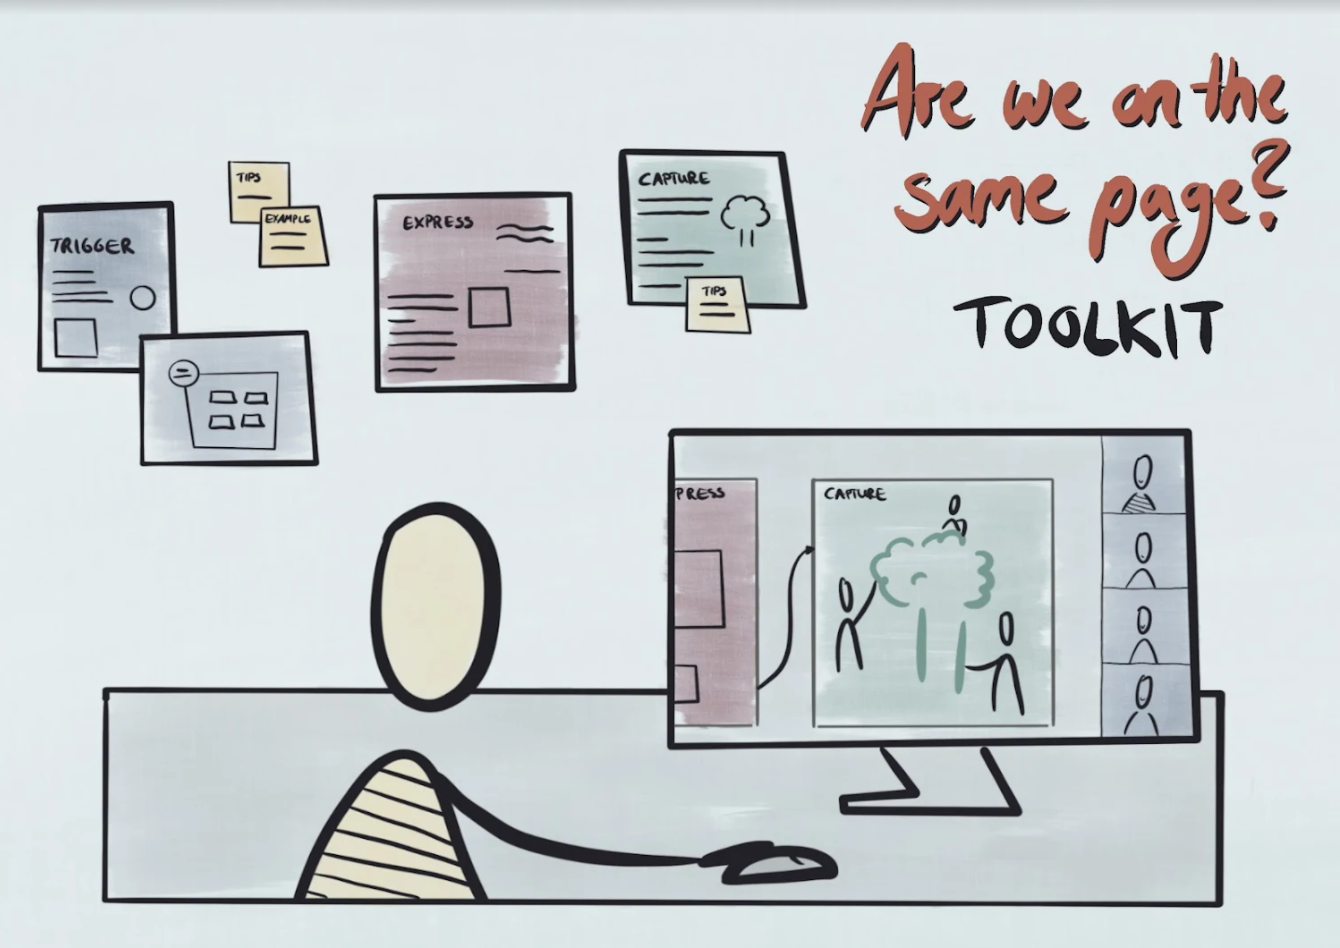 Illustration with the title 'Are we on the same page toolkit'